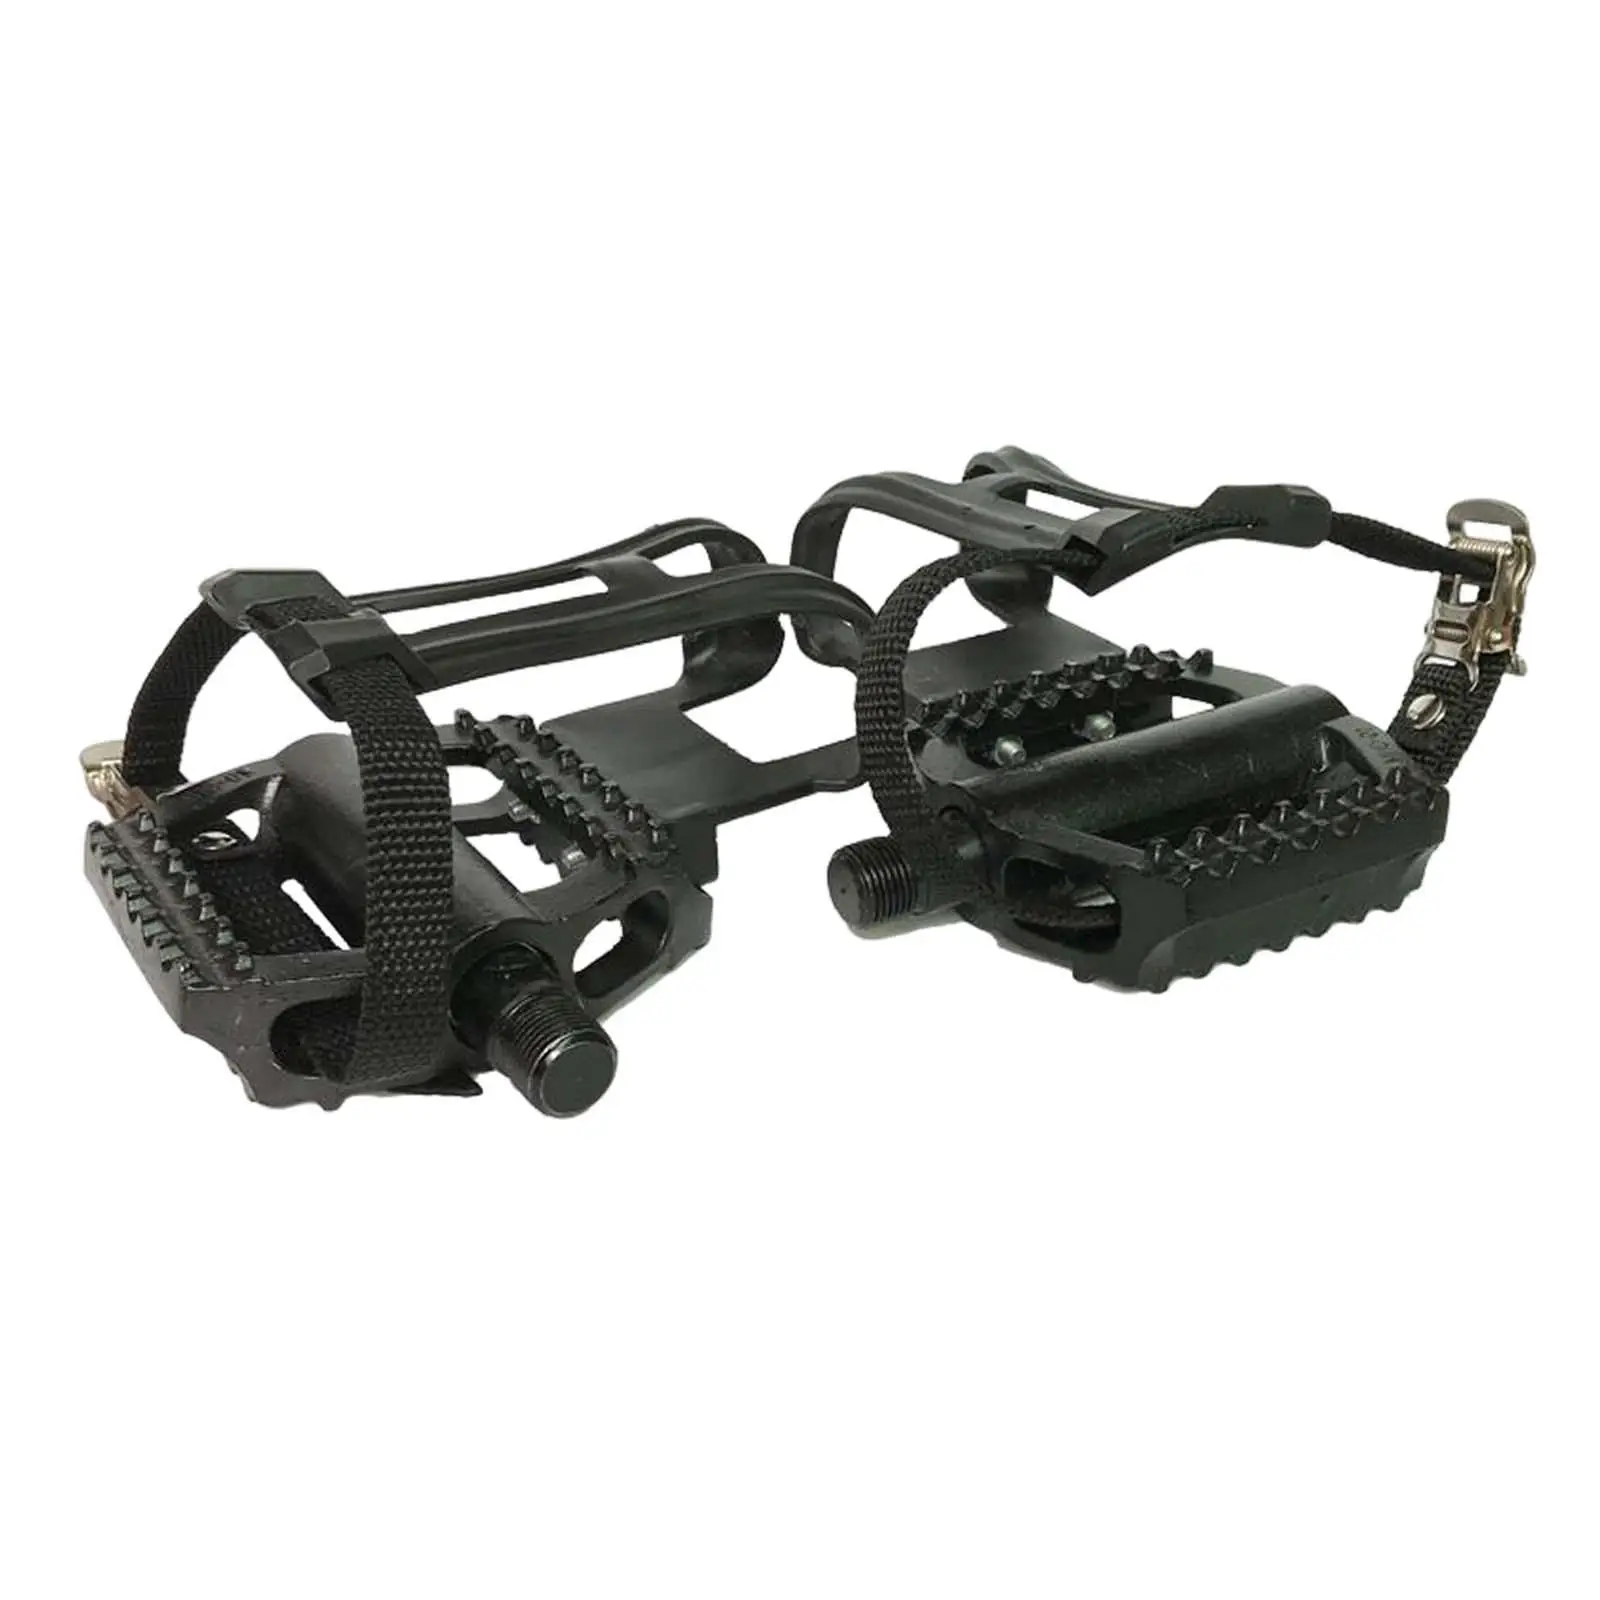 Exercise Bike Pedals 18mm Spindle W/ Adjustable Straps for Accessories Parts